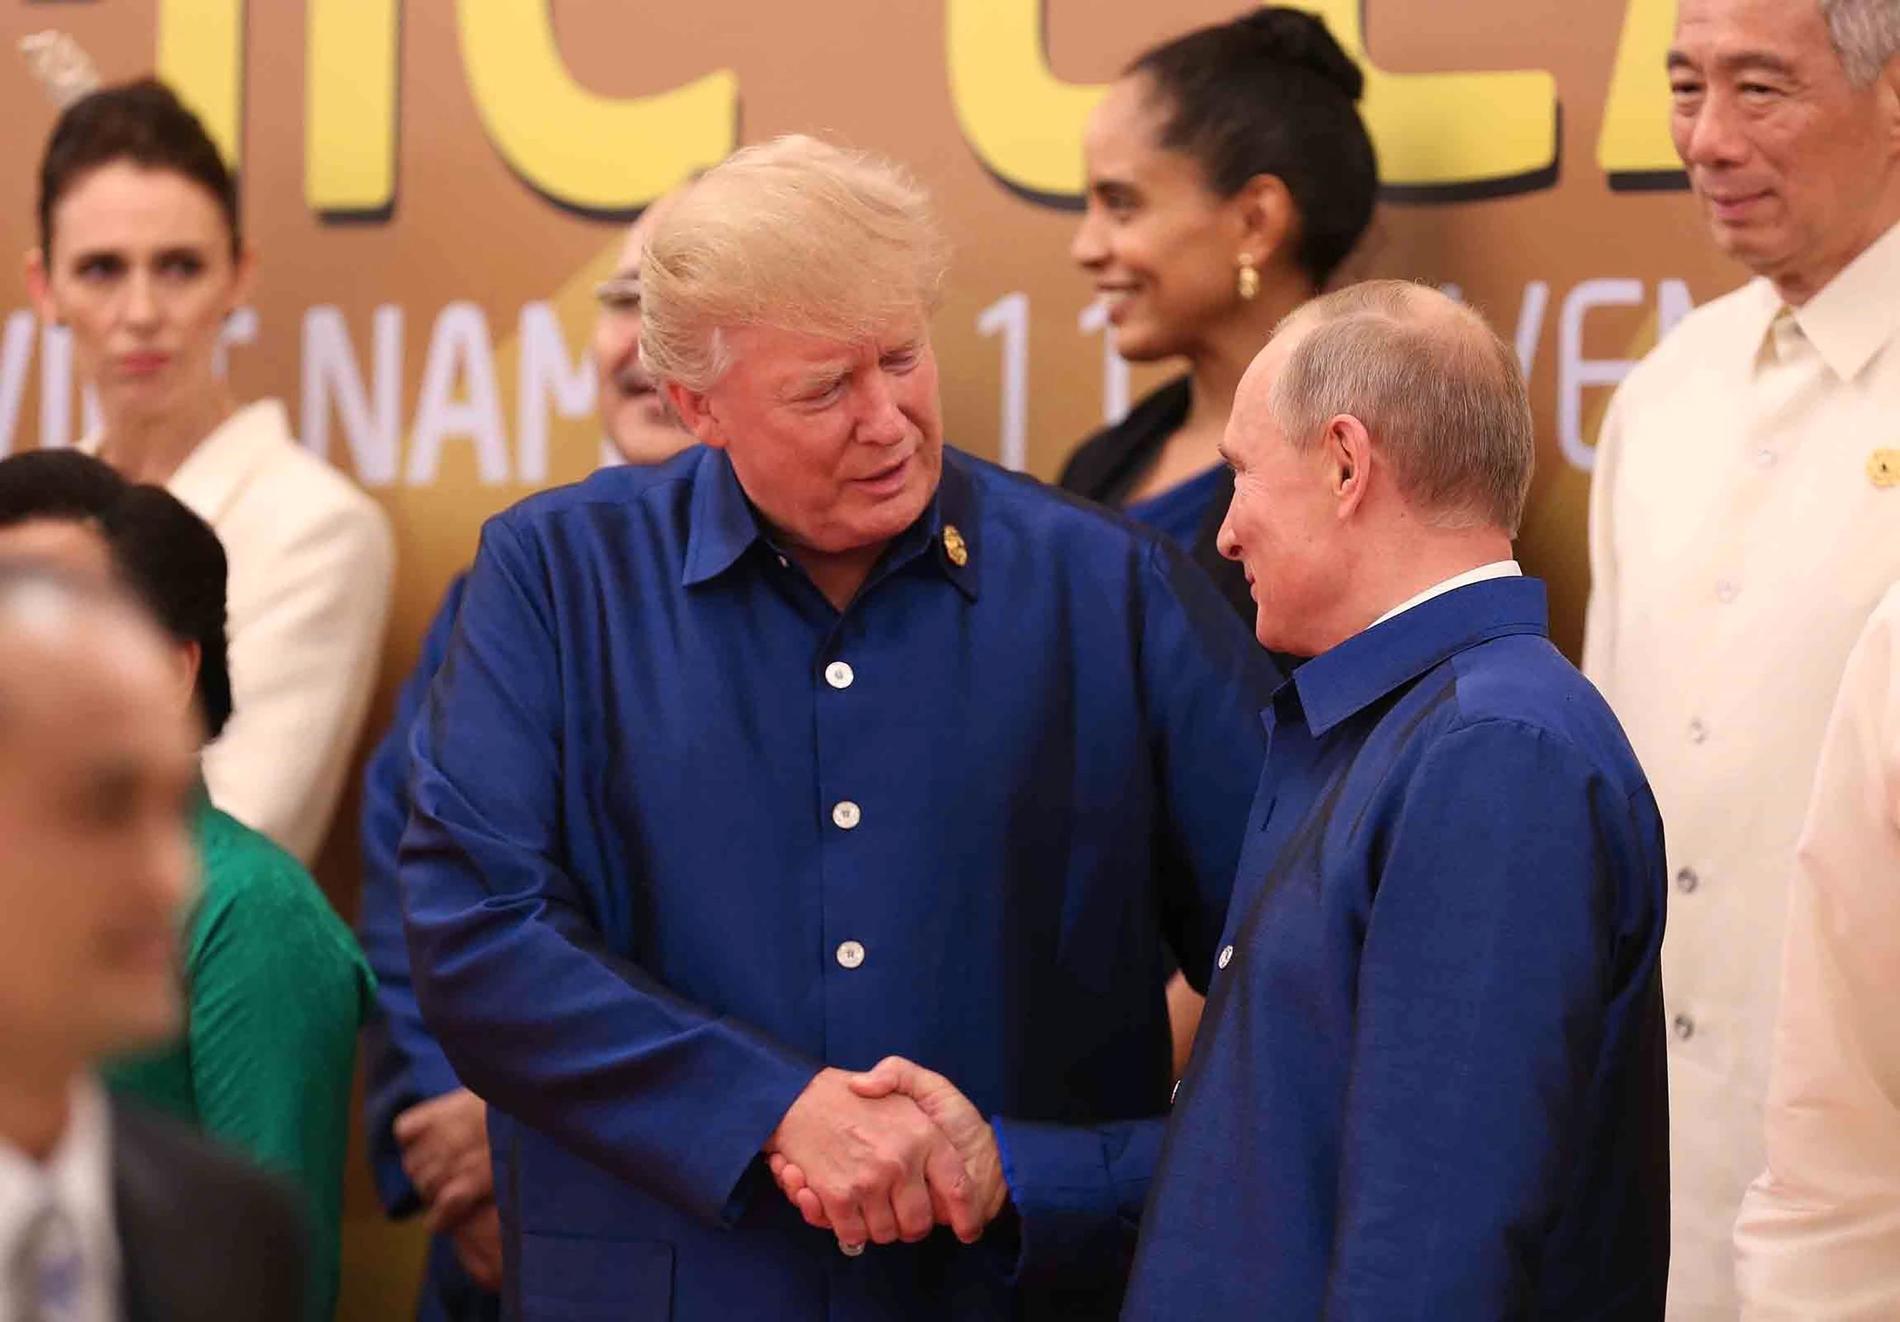 On the talk in full swing: Donald Trump and Vladimir Putin in conversation at the APEC summit in Vietnam in 2017.